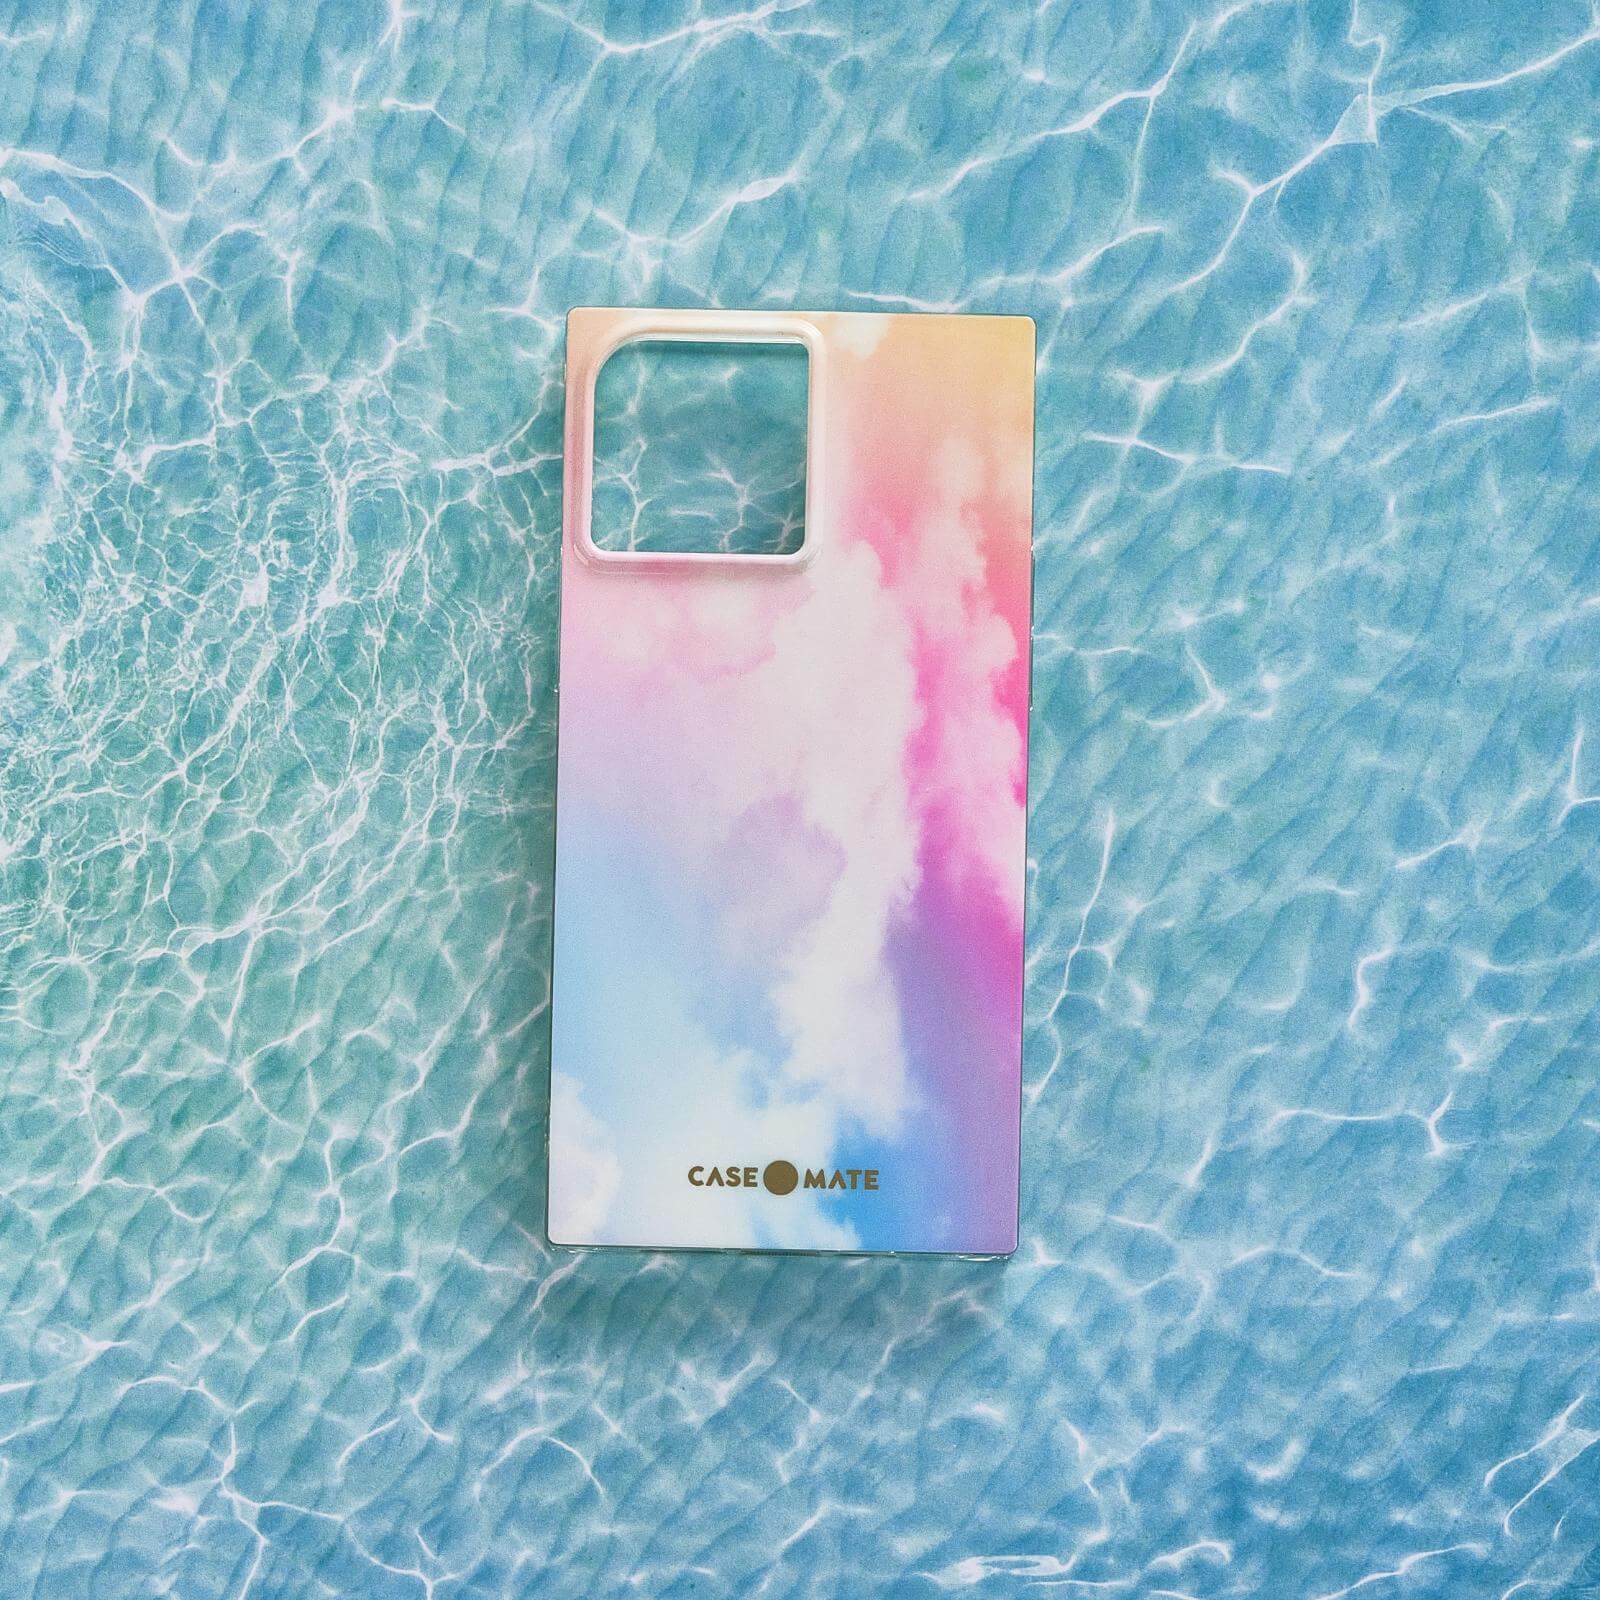 Cloud 9 printed case in front of blue water background. color::Cloud 9